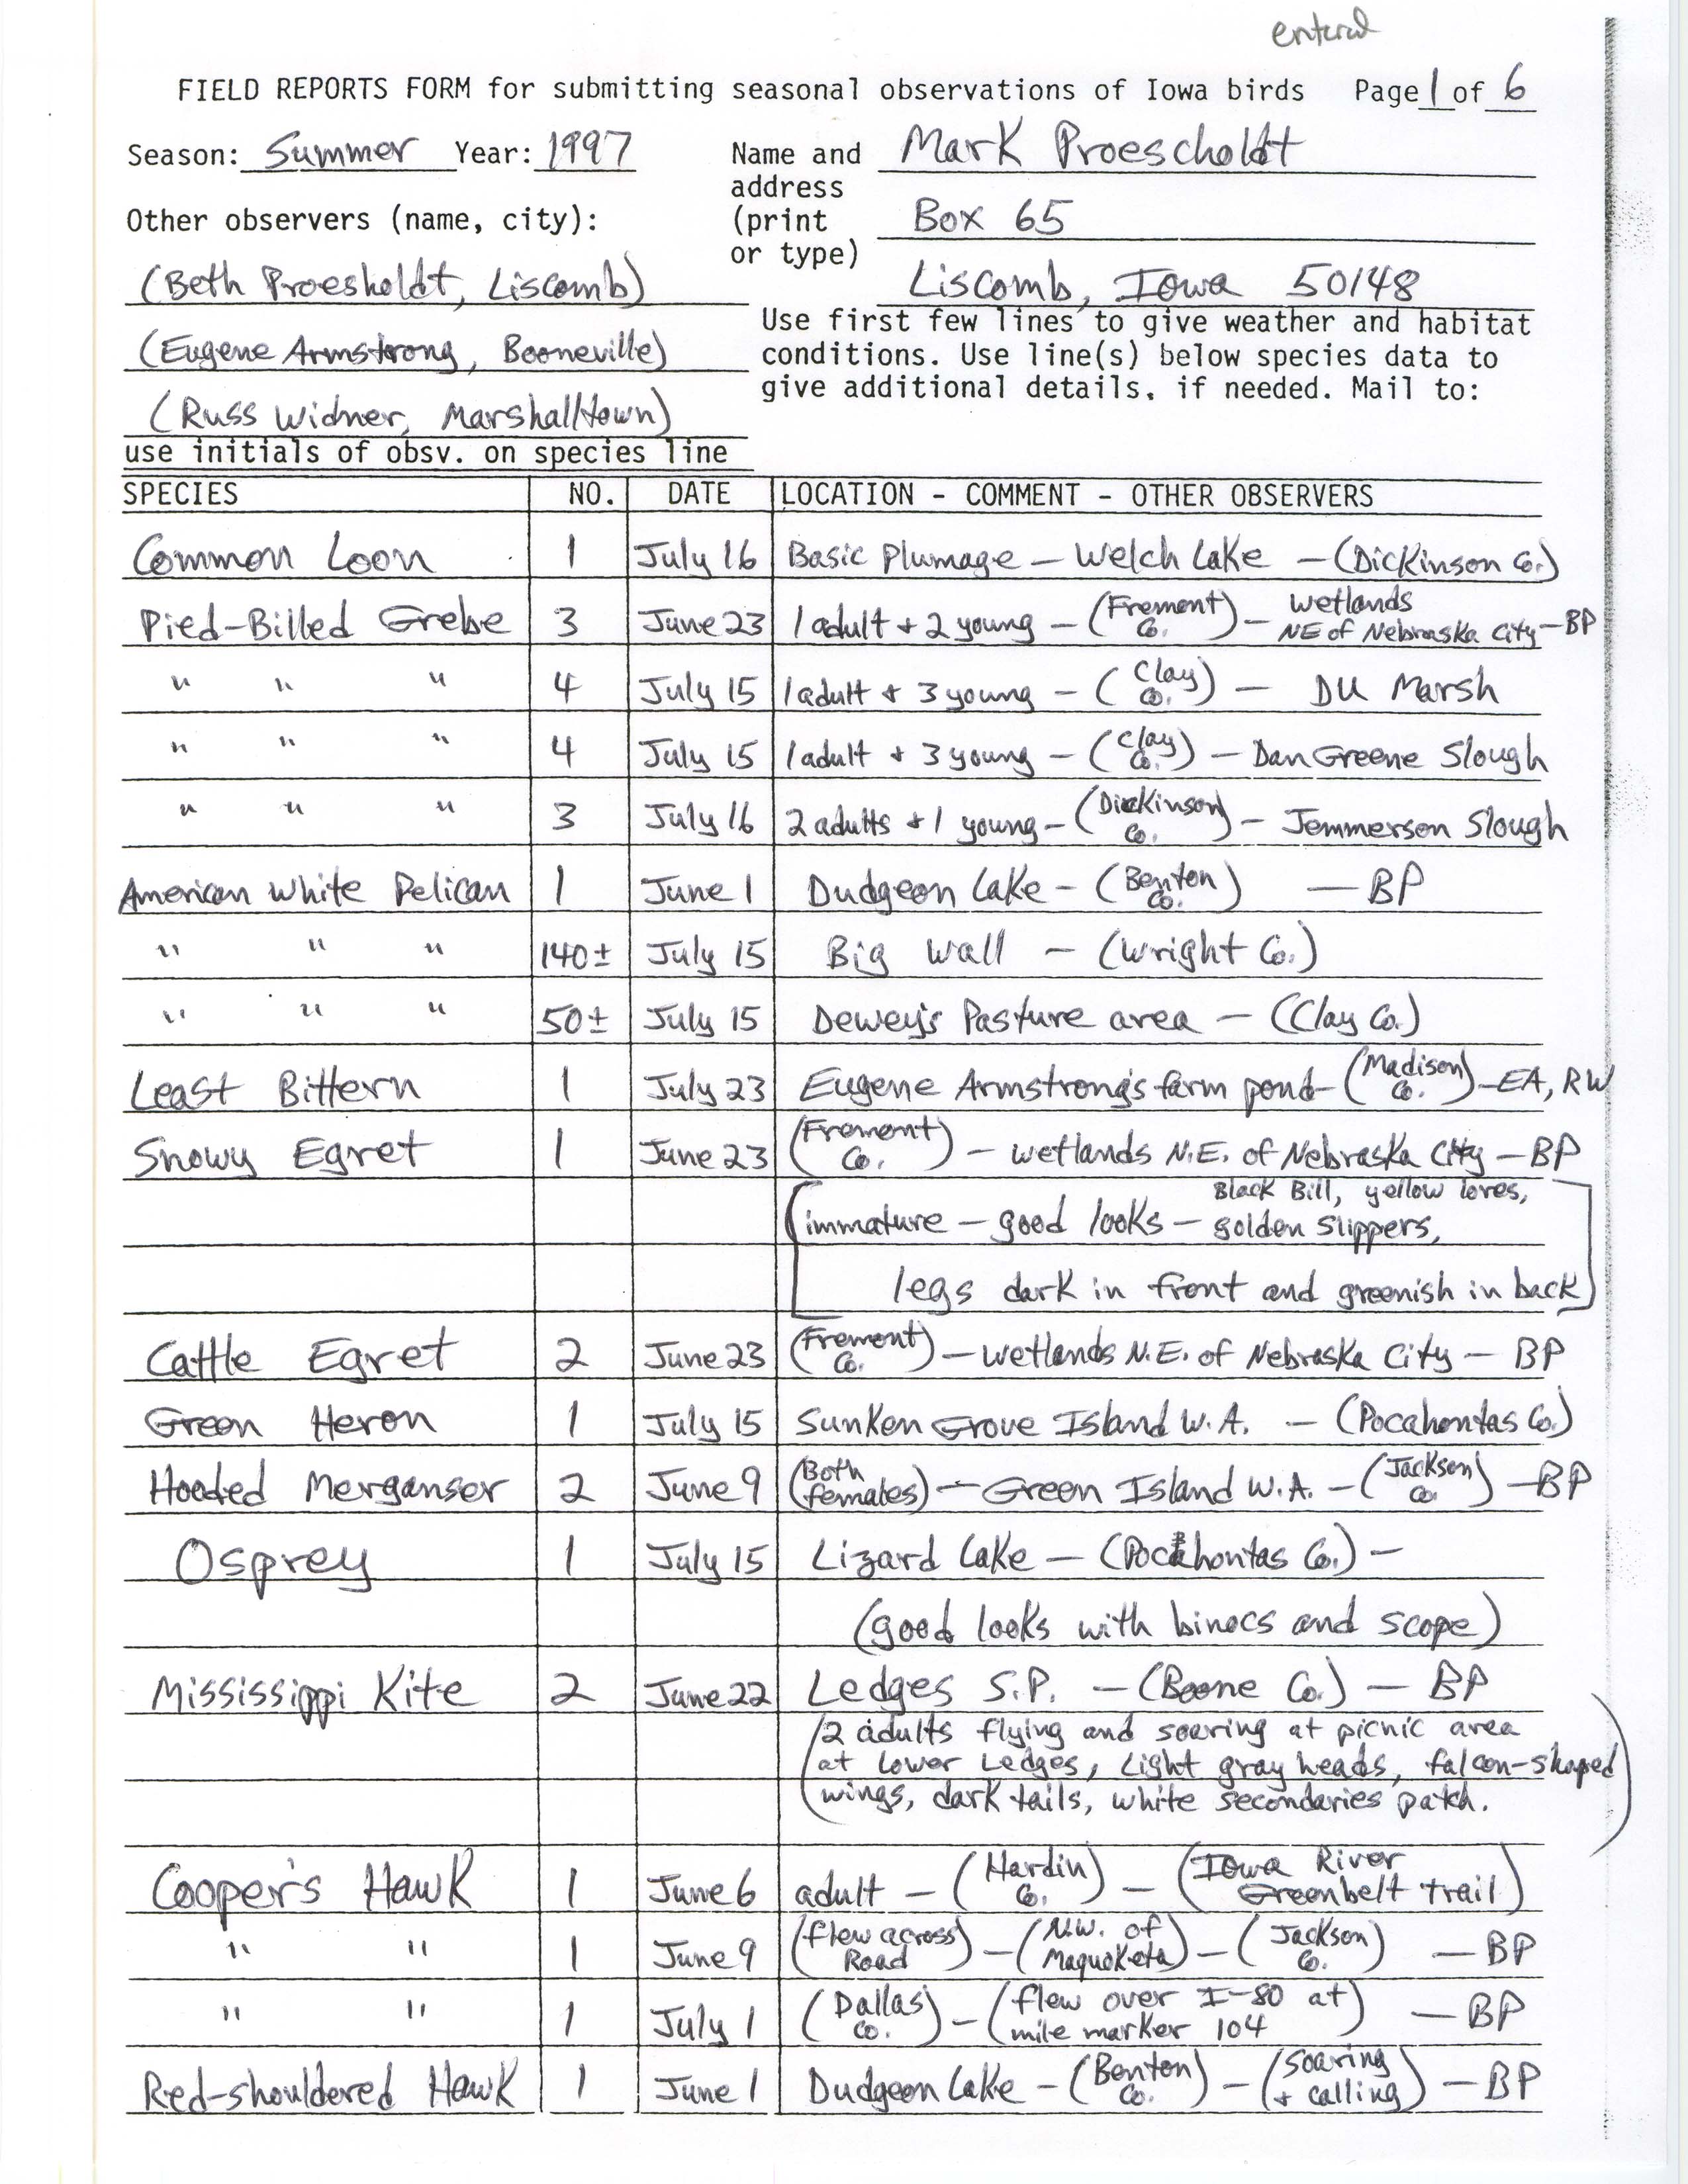 Field reports form for submitting seasonal observations of Iowa birds, Mark Proescholdt, summer 1997